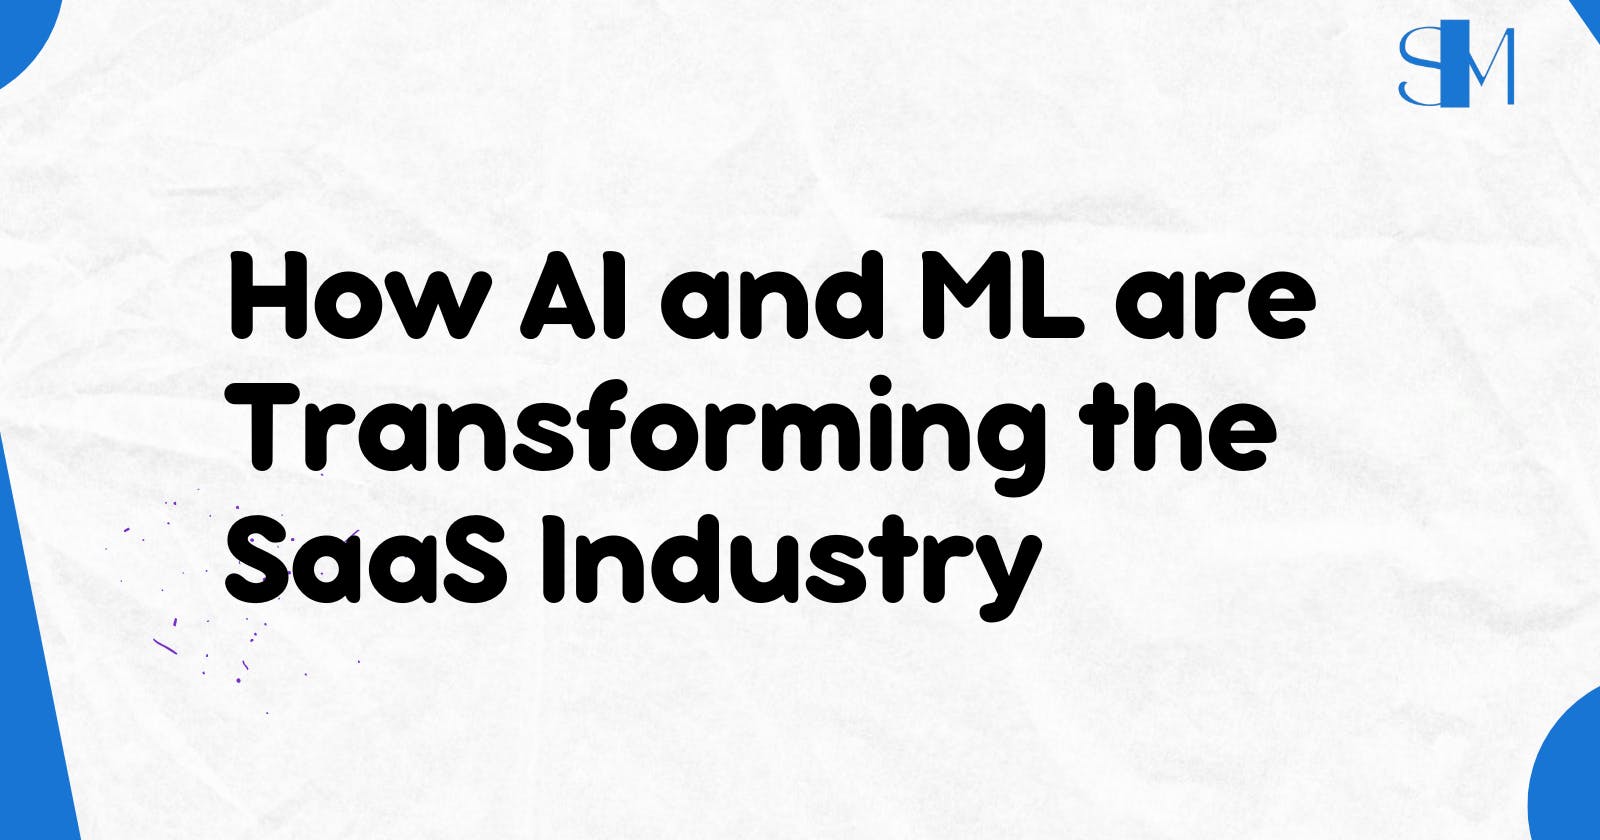 How AI and ML are Transforming the SaaS Industry